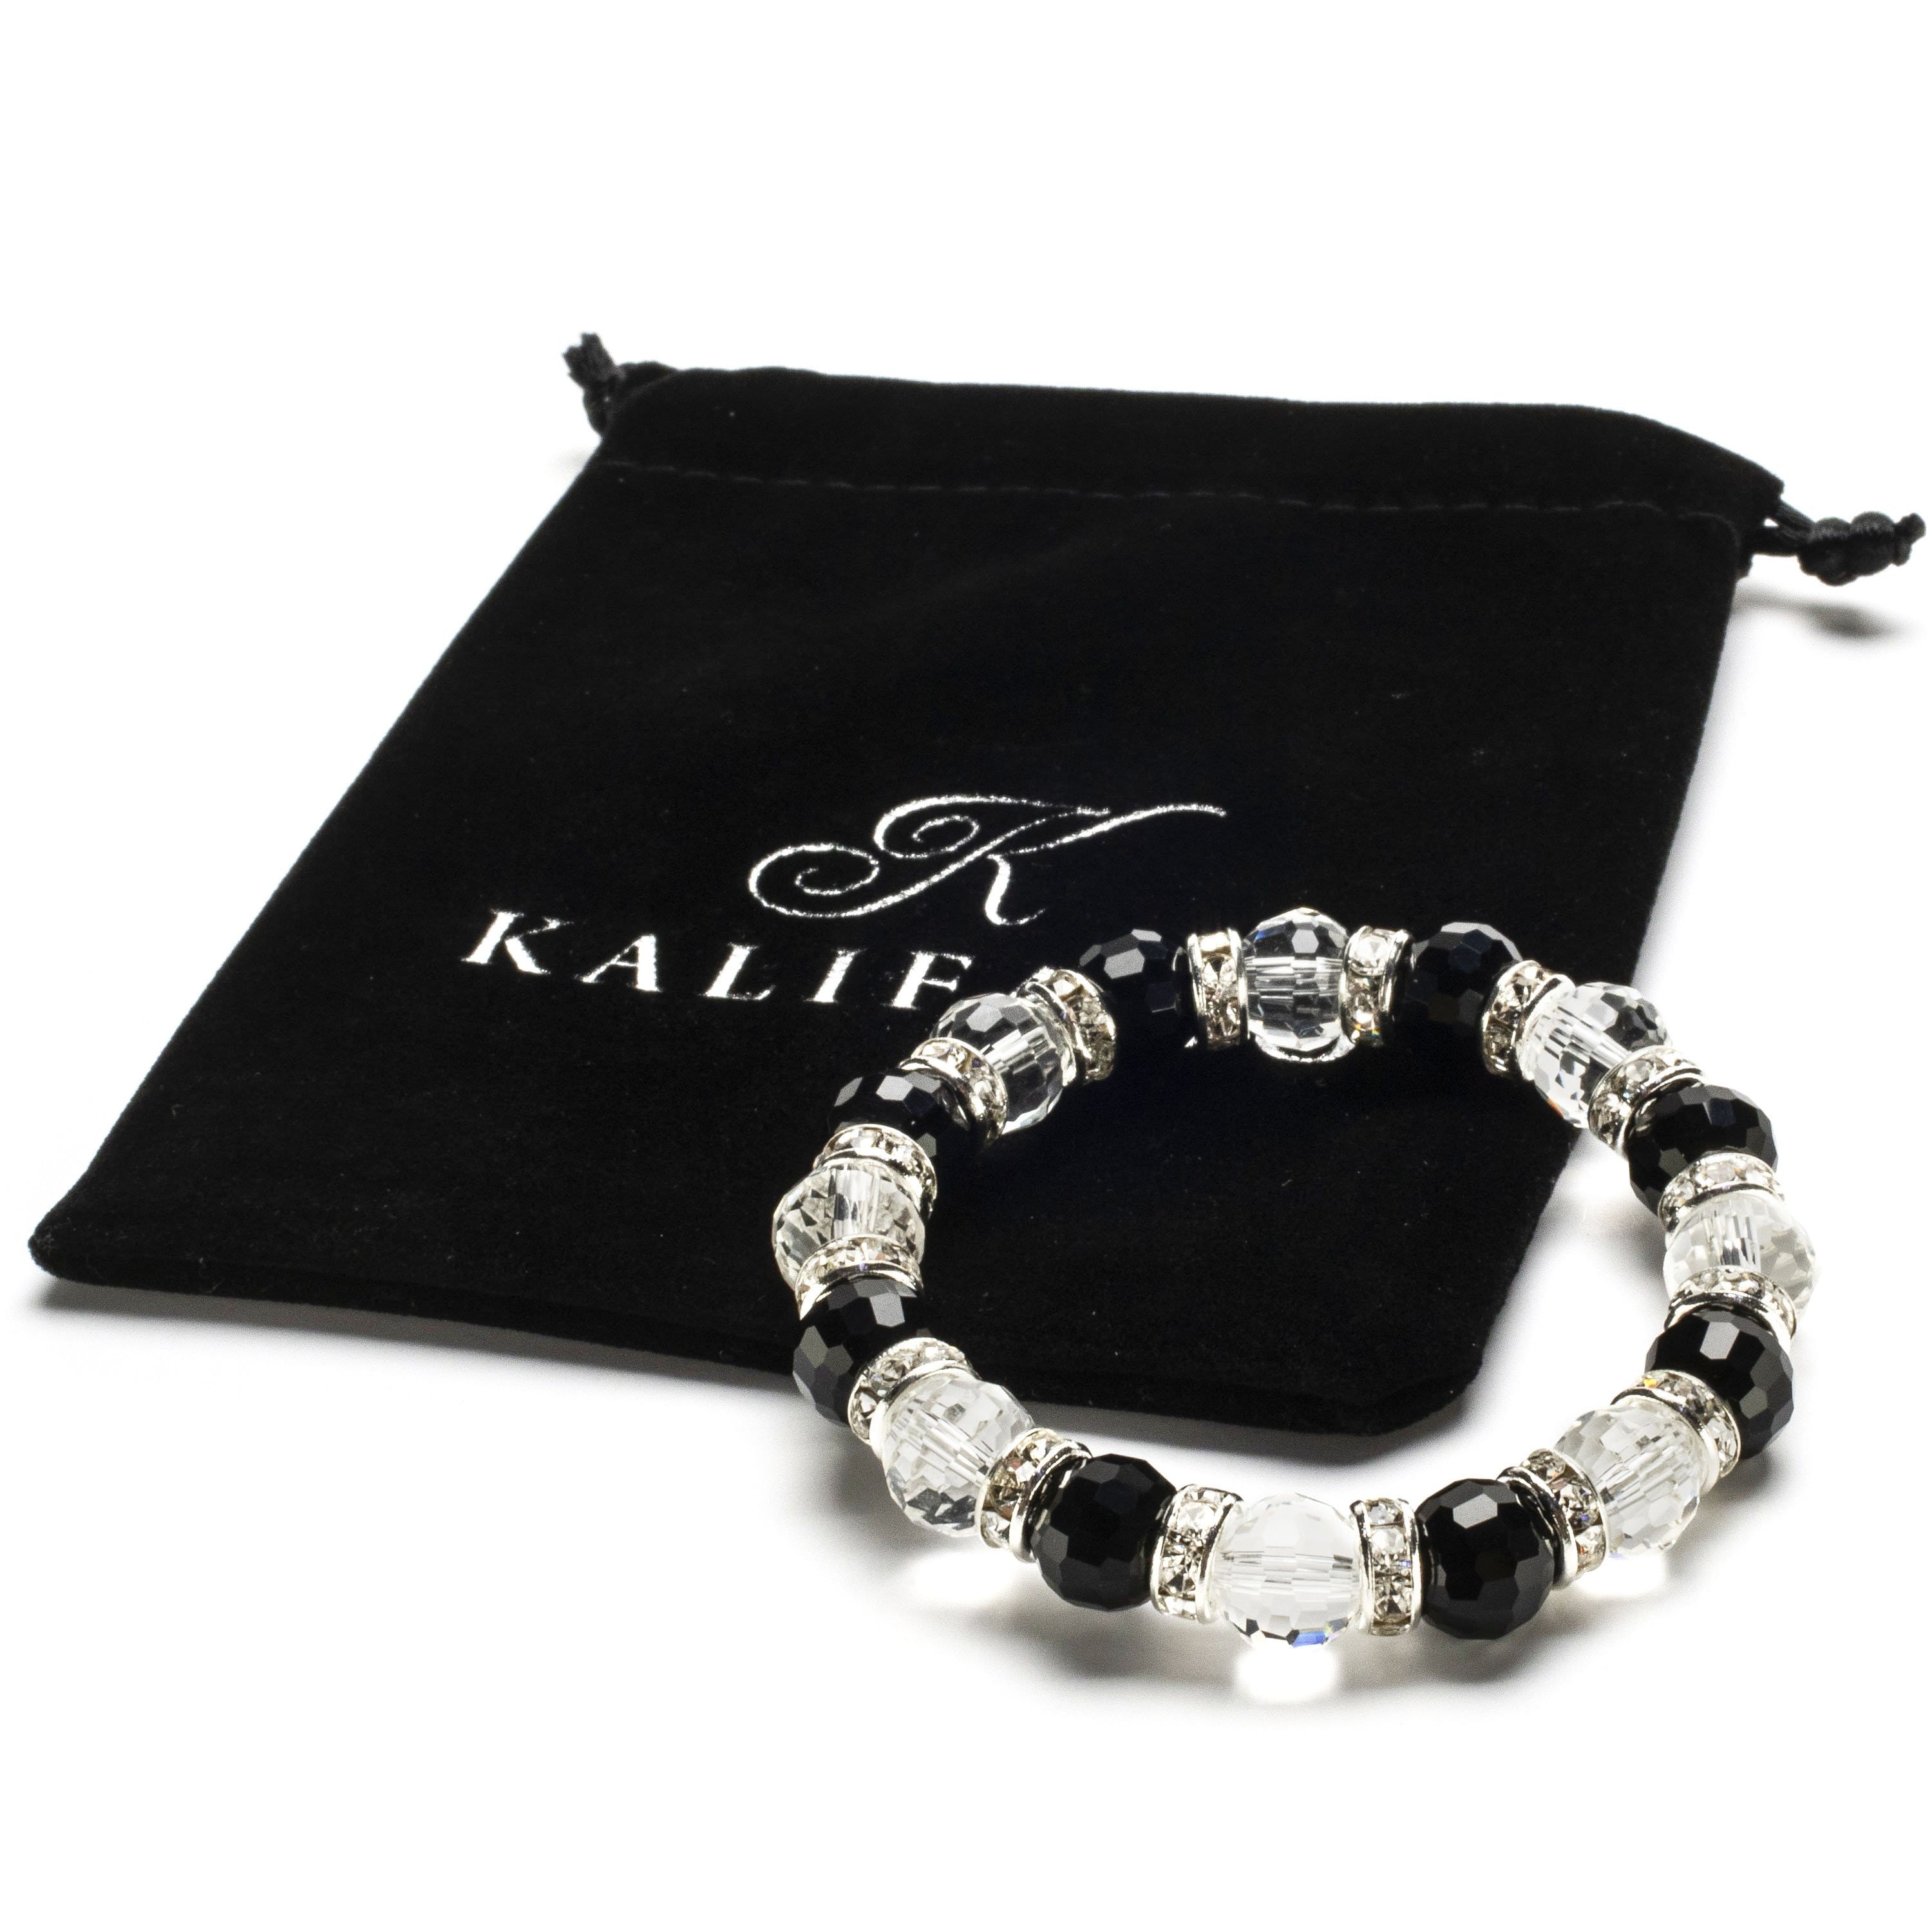 Kalifano Gorgeous Glass Jewelry Multicolored Gorgeous Glass Bracelet with Cubic Zirconia Crystals BLUE-BGG-N12